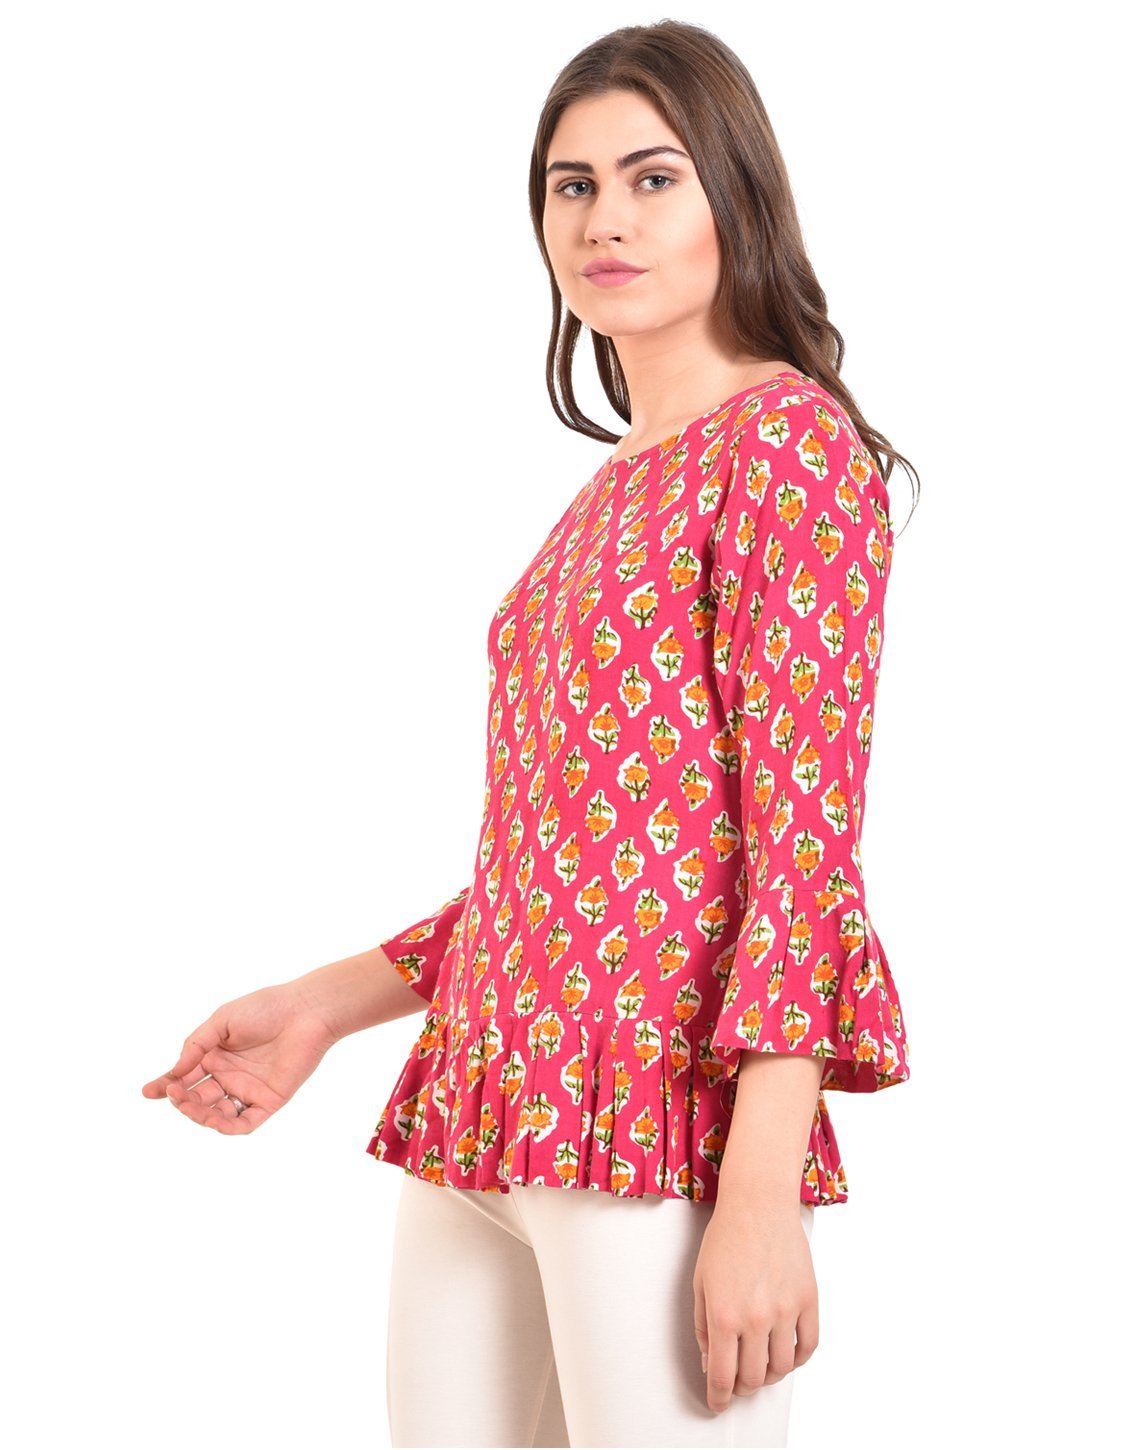 Women's Pink Printed Bell Sleeve Round Rayon Casual Top - Myshka